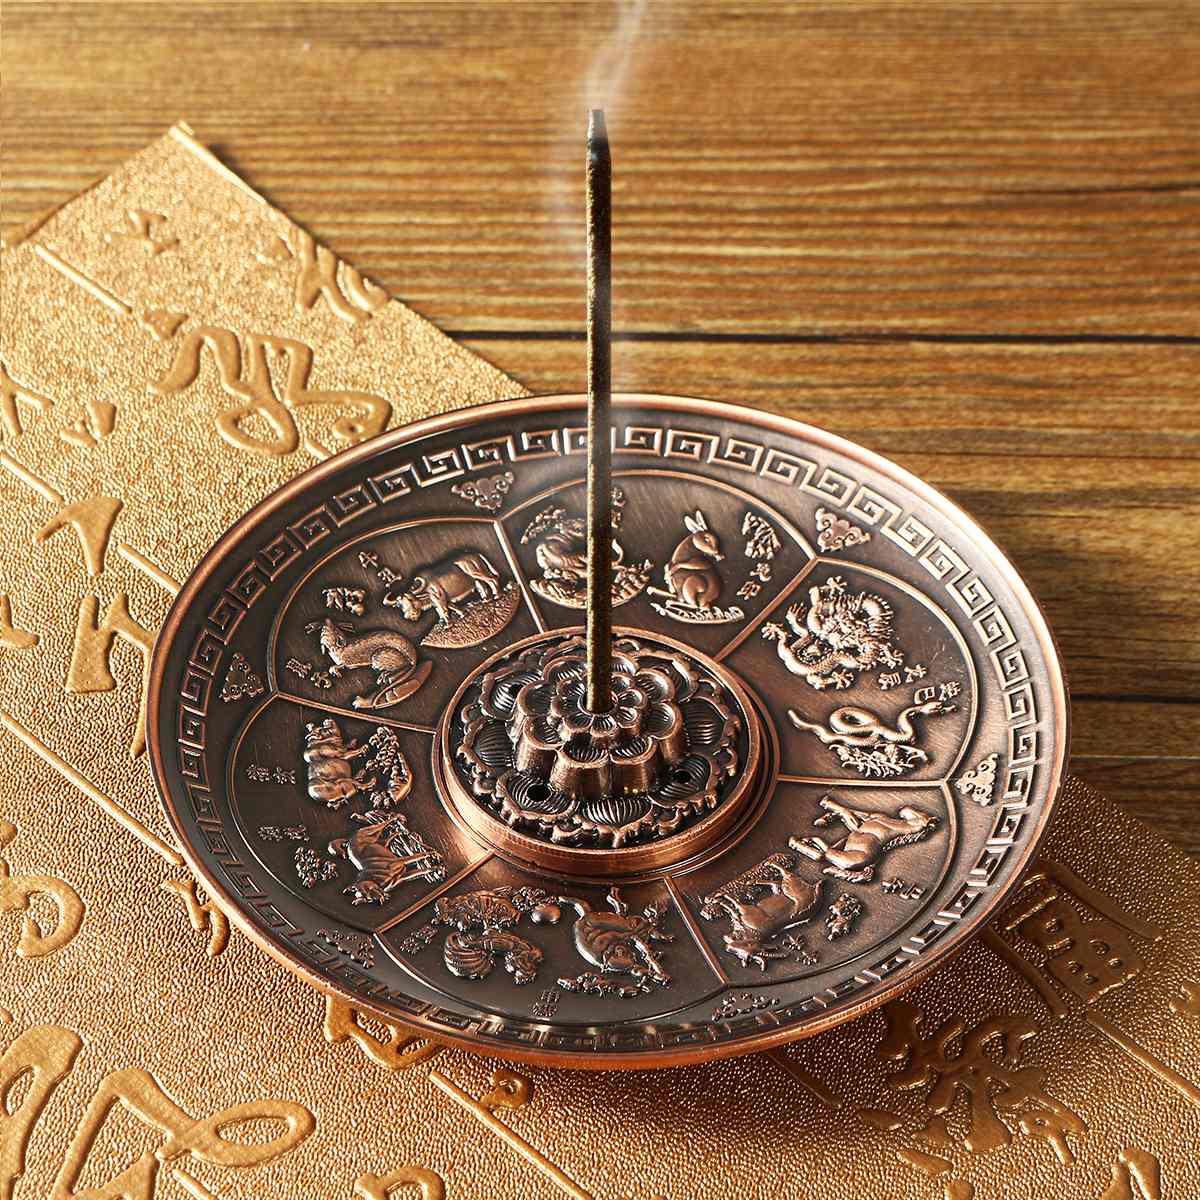 Chinese Dragon Incense Holder Retro 5 Holes Lotus Incense Burners Stick Cone Censer Plate Buddhism Home Office Decoration Crafts